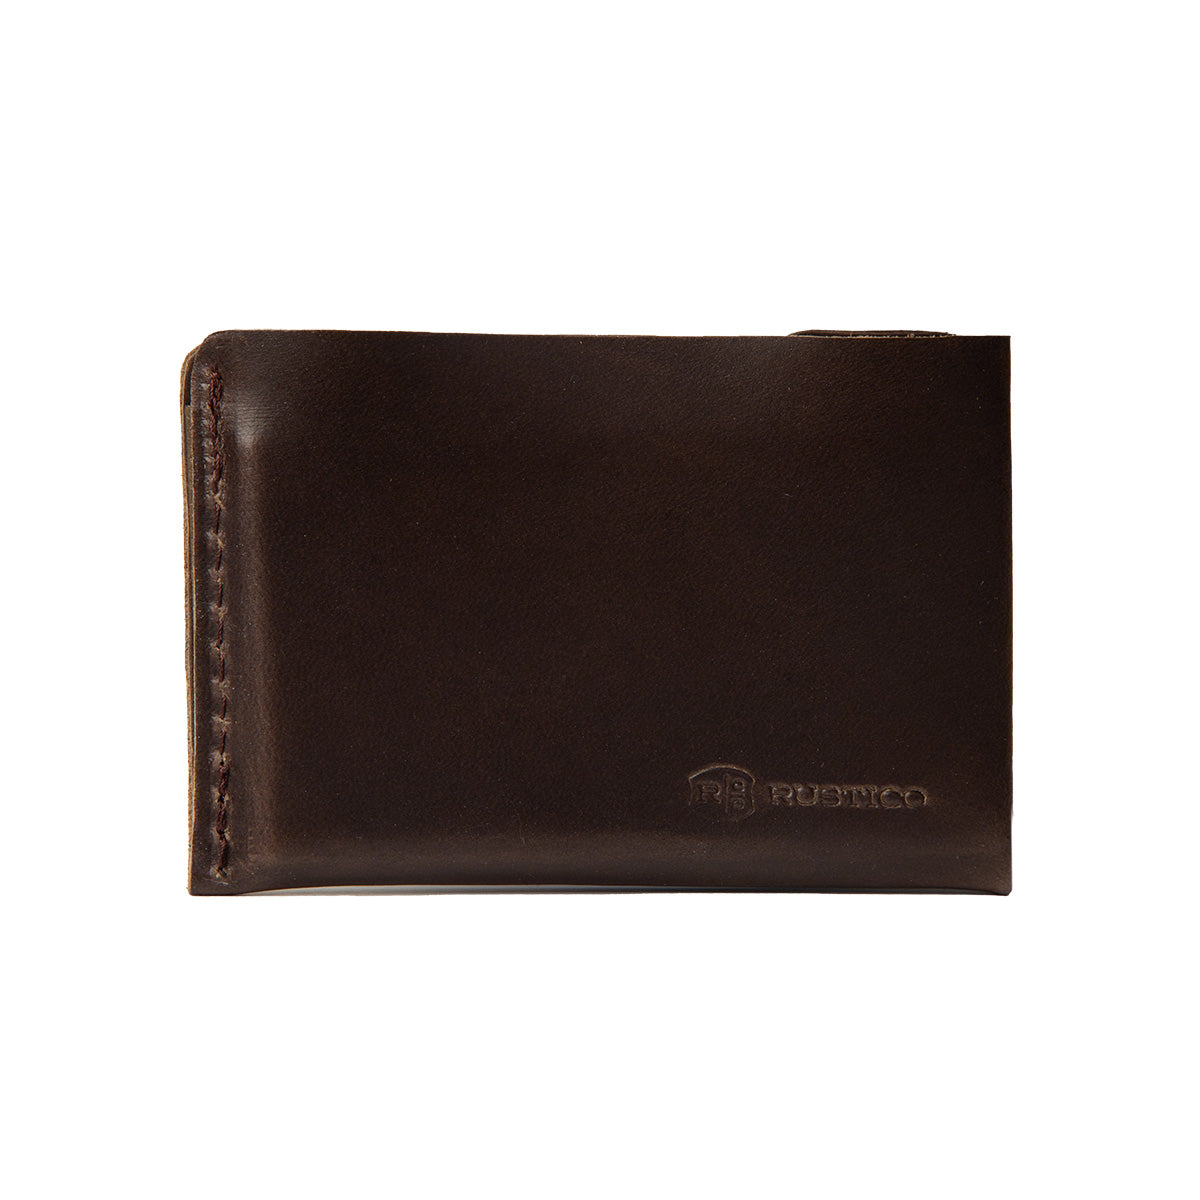 Rustico AC0117-0001 Rover Slim Leather Wallet for Unisex, Dark Brown